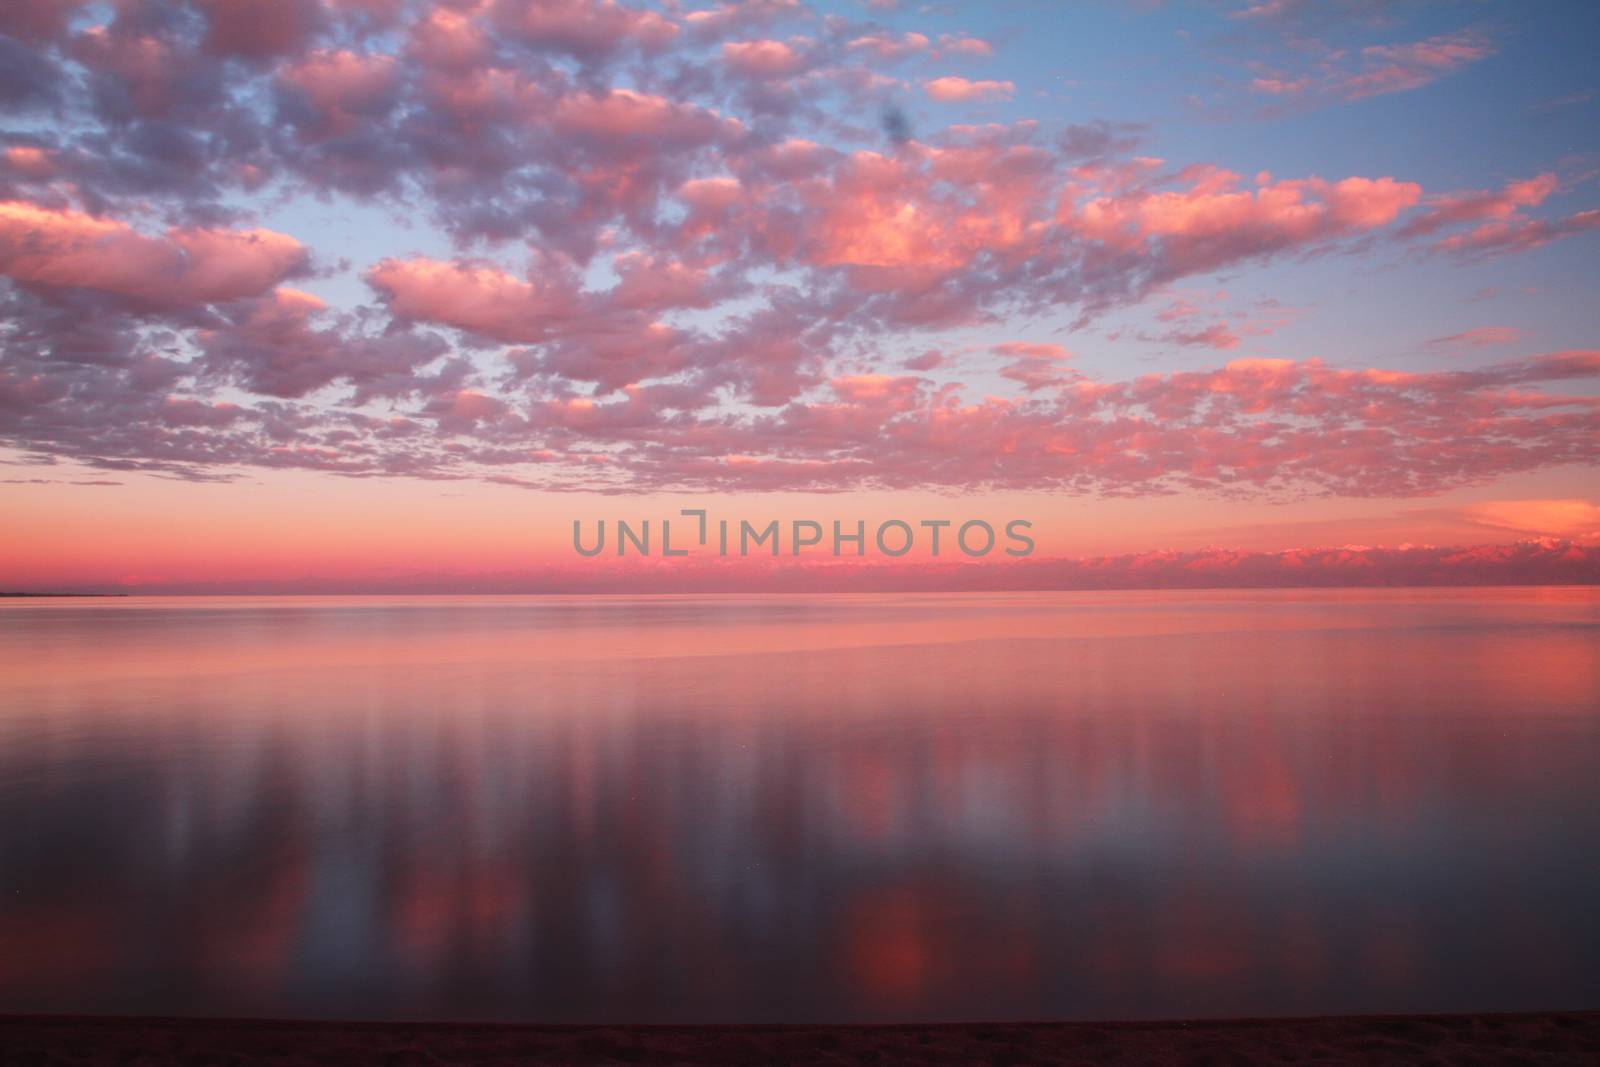 Clouds reflected on the water during sunset by selinsmo